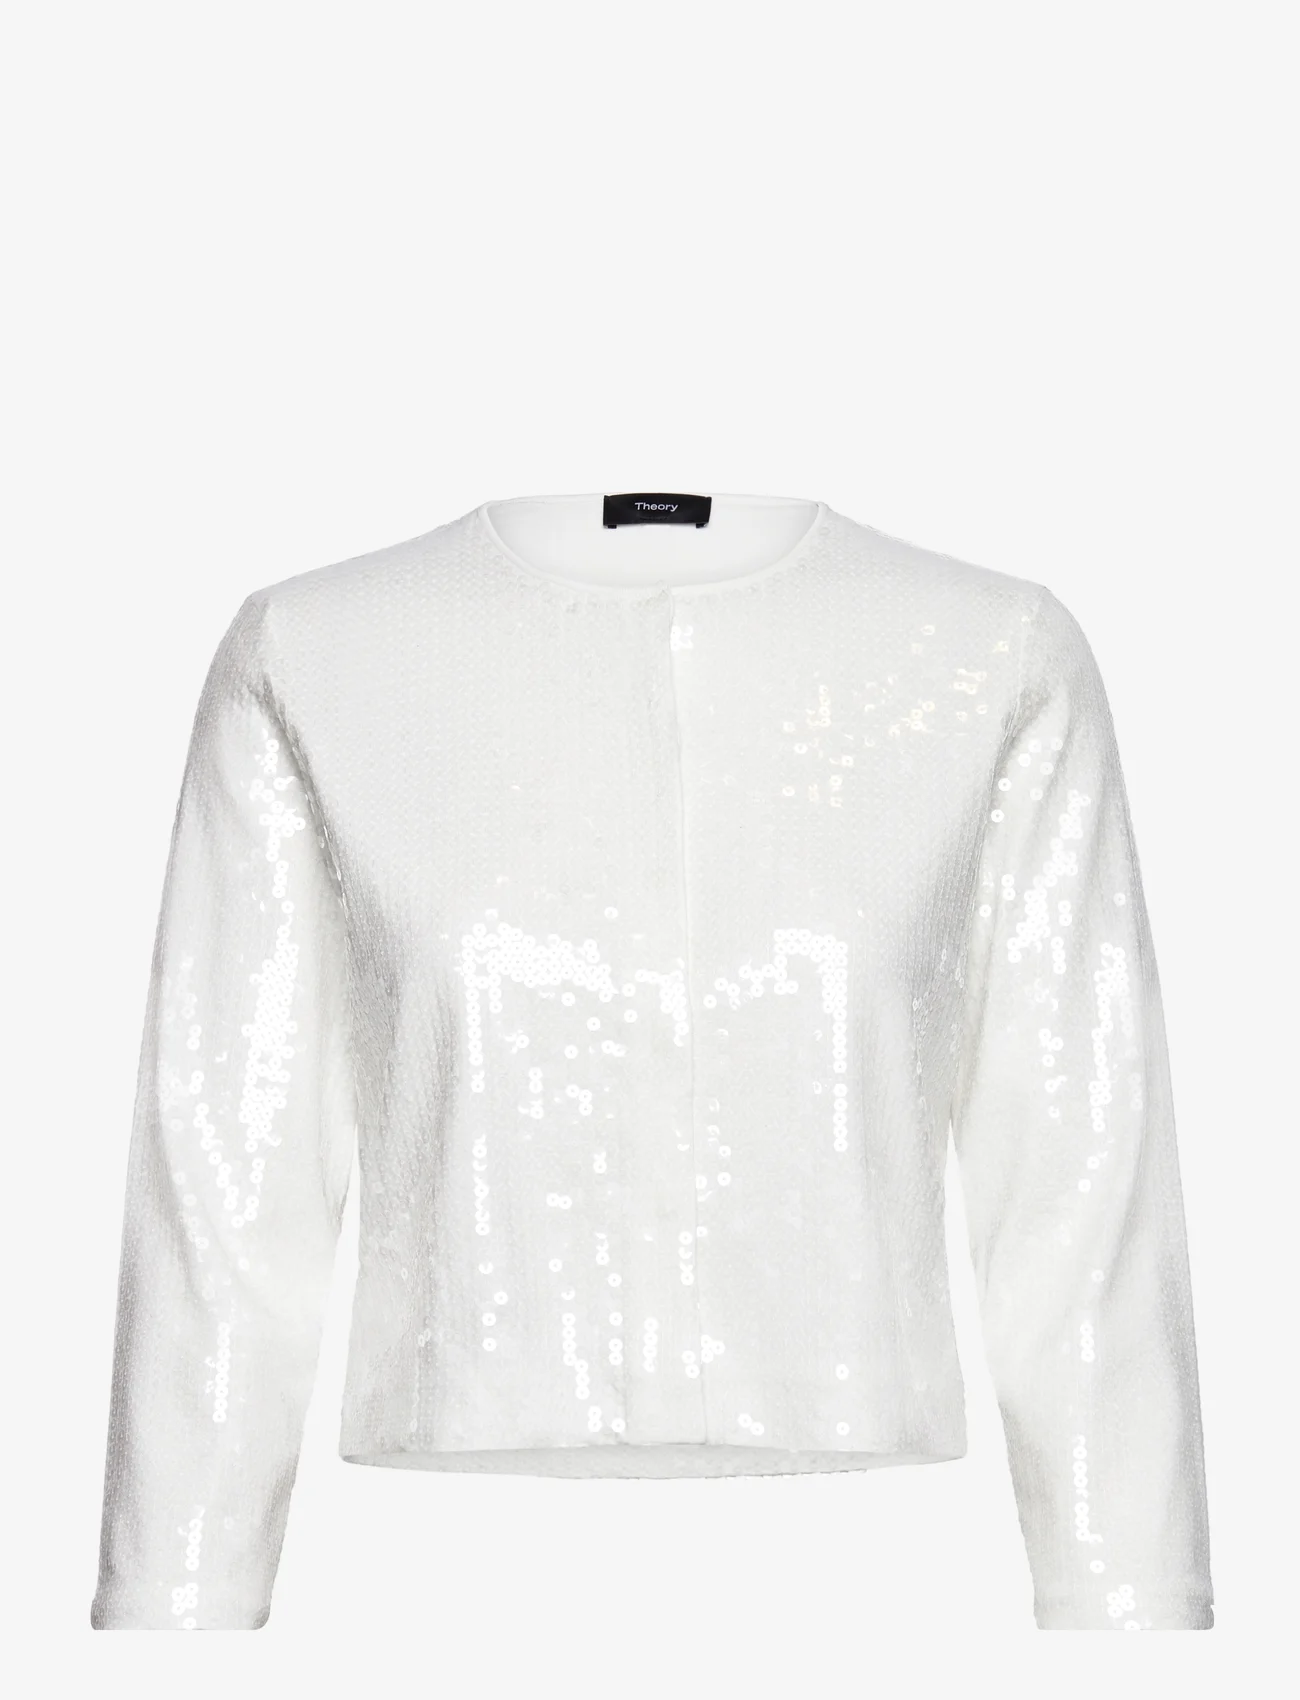 Theory - SEQUIN CARDIGAN.COMP - cardigans - white - 0